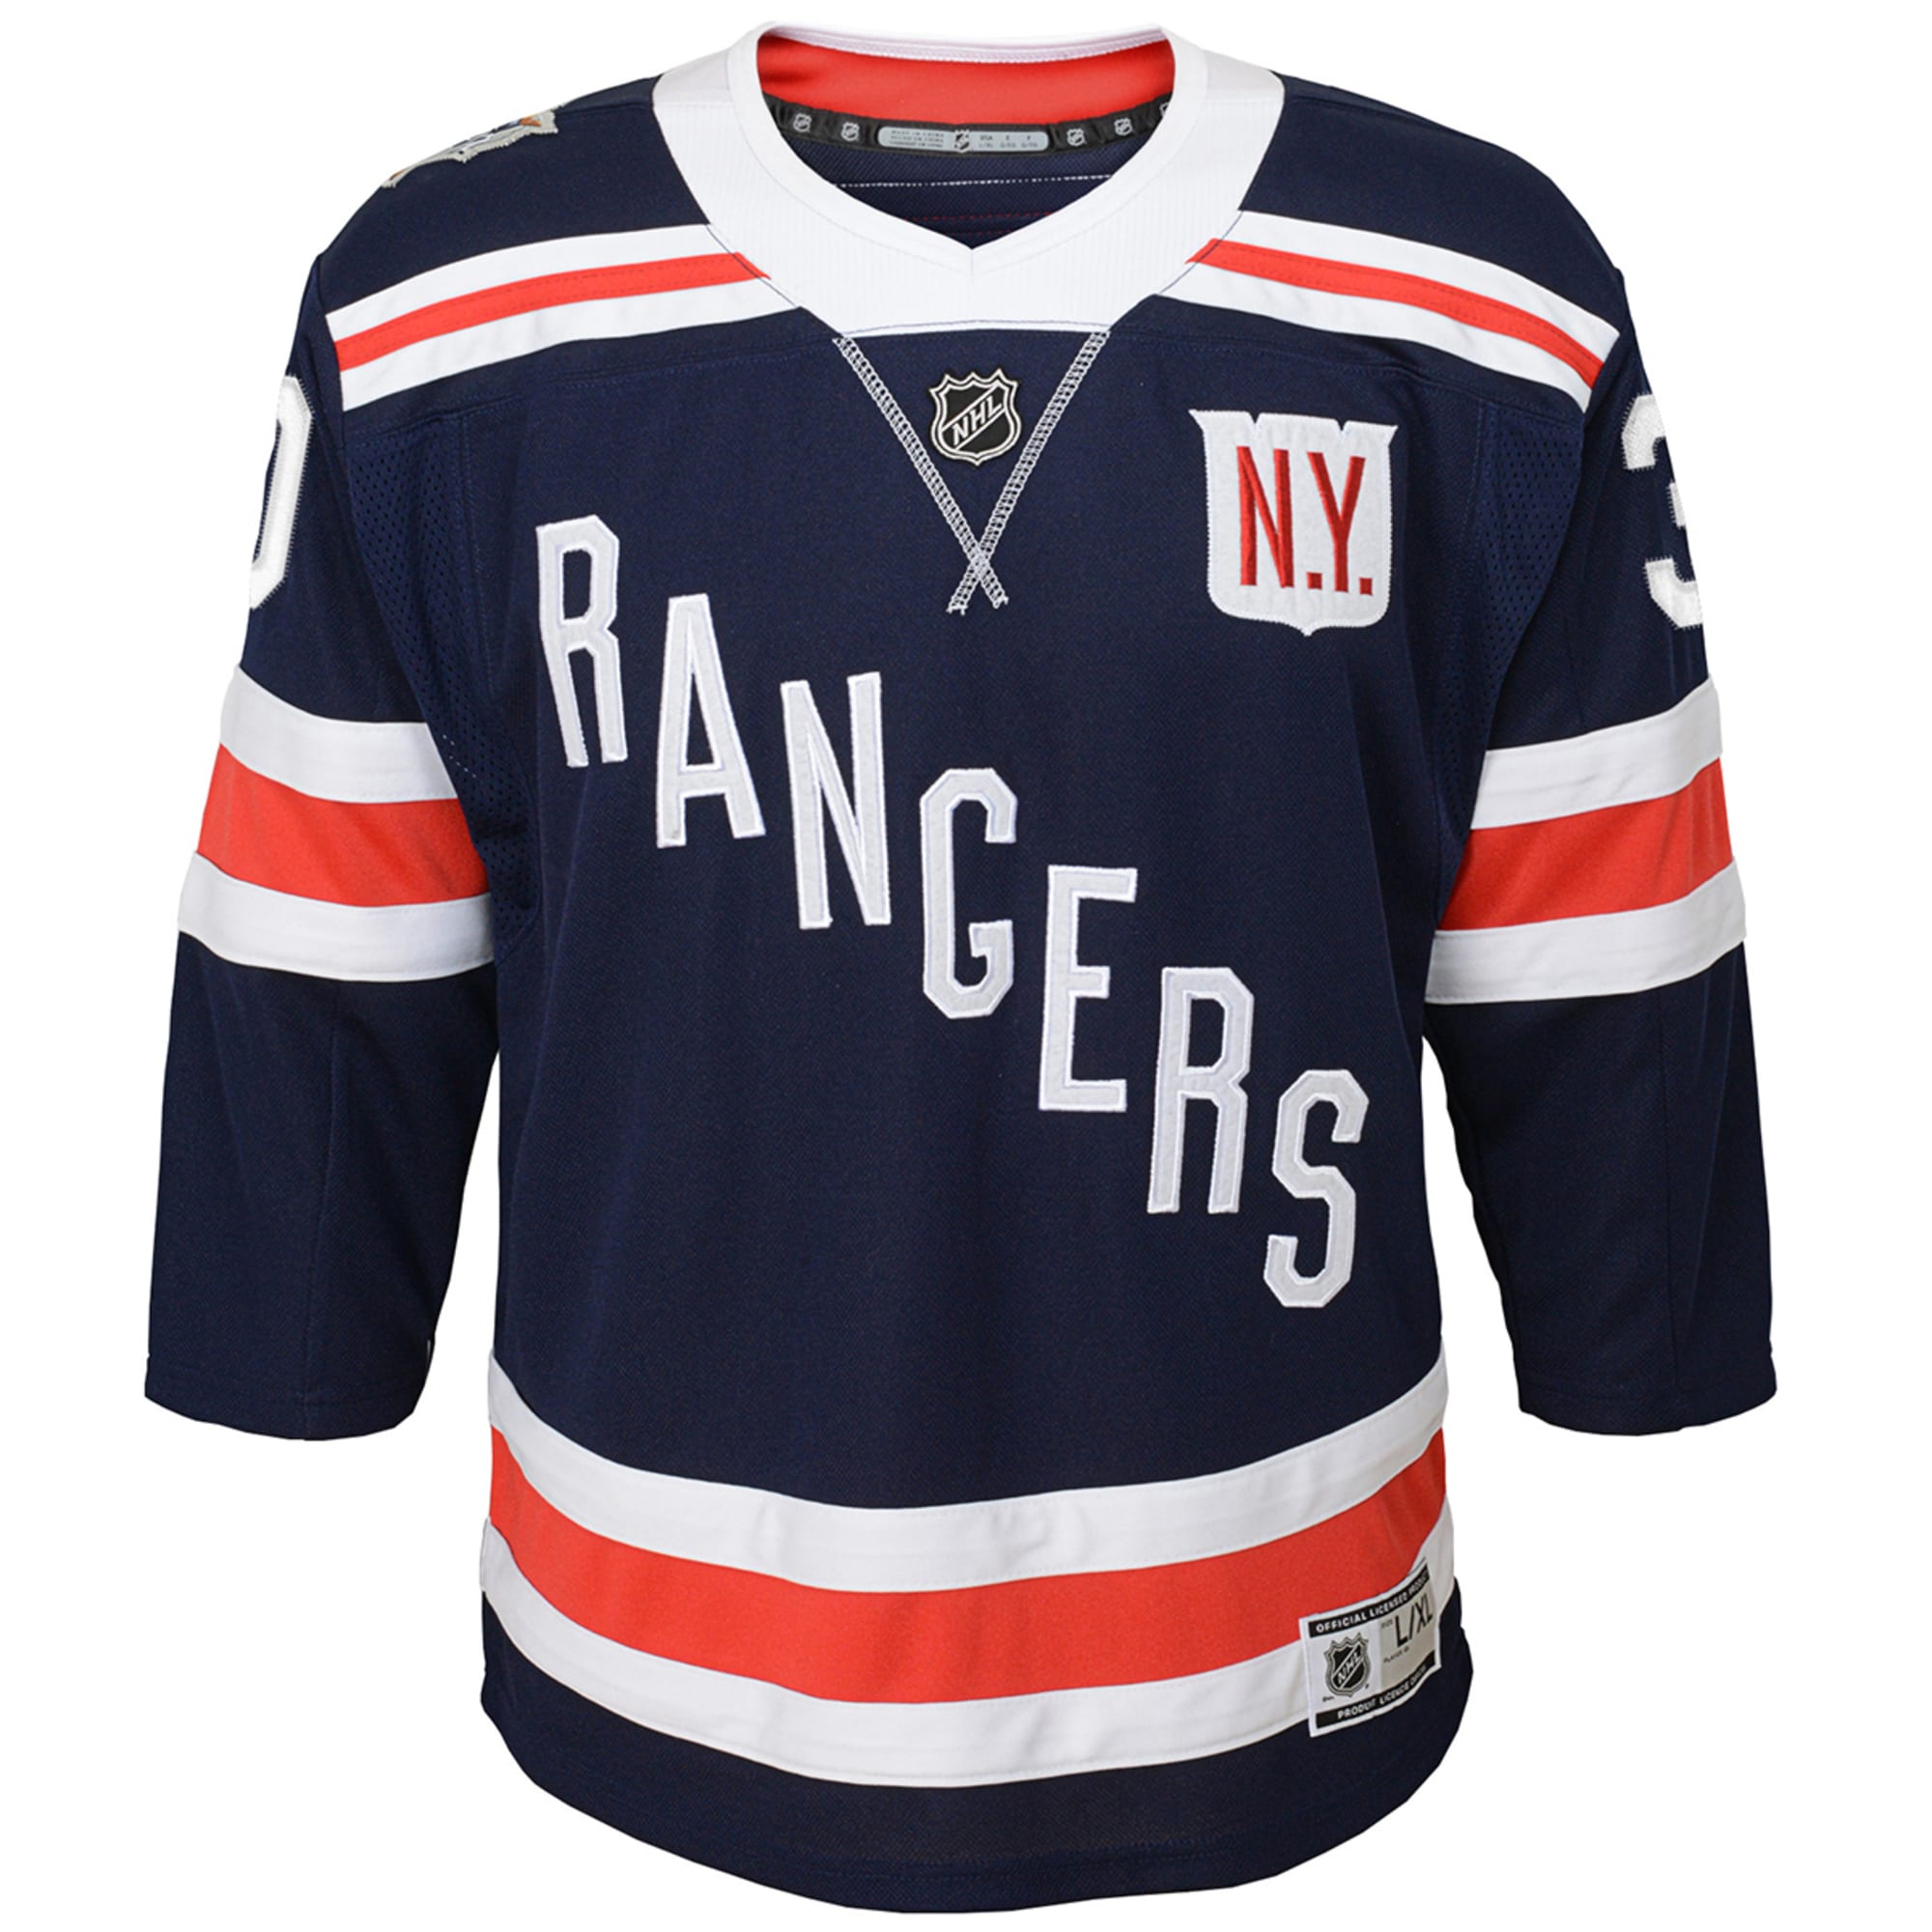 Athletic Knit (AK) ZH181-NYR3050 2018 New York Rangers Winter Classic Navy  Sublimated Hockey Jersey